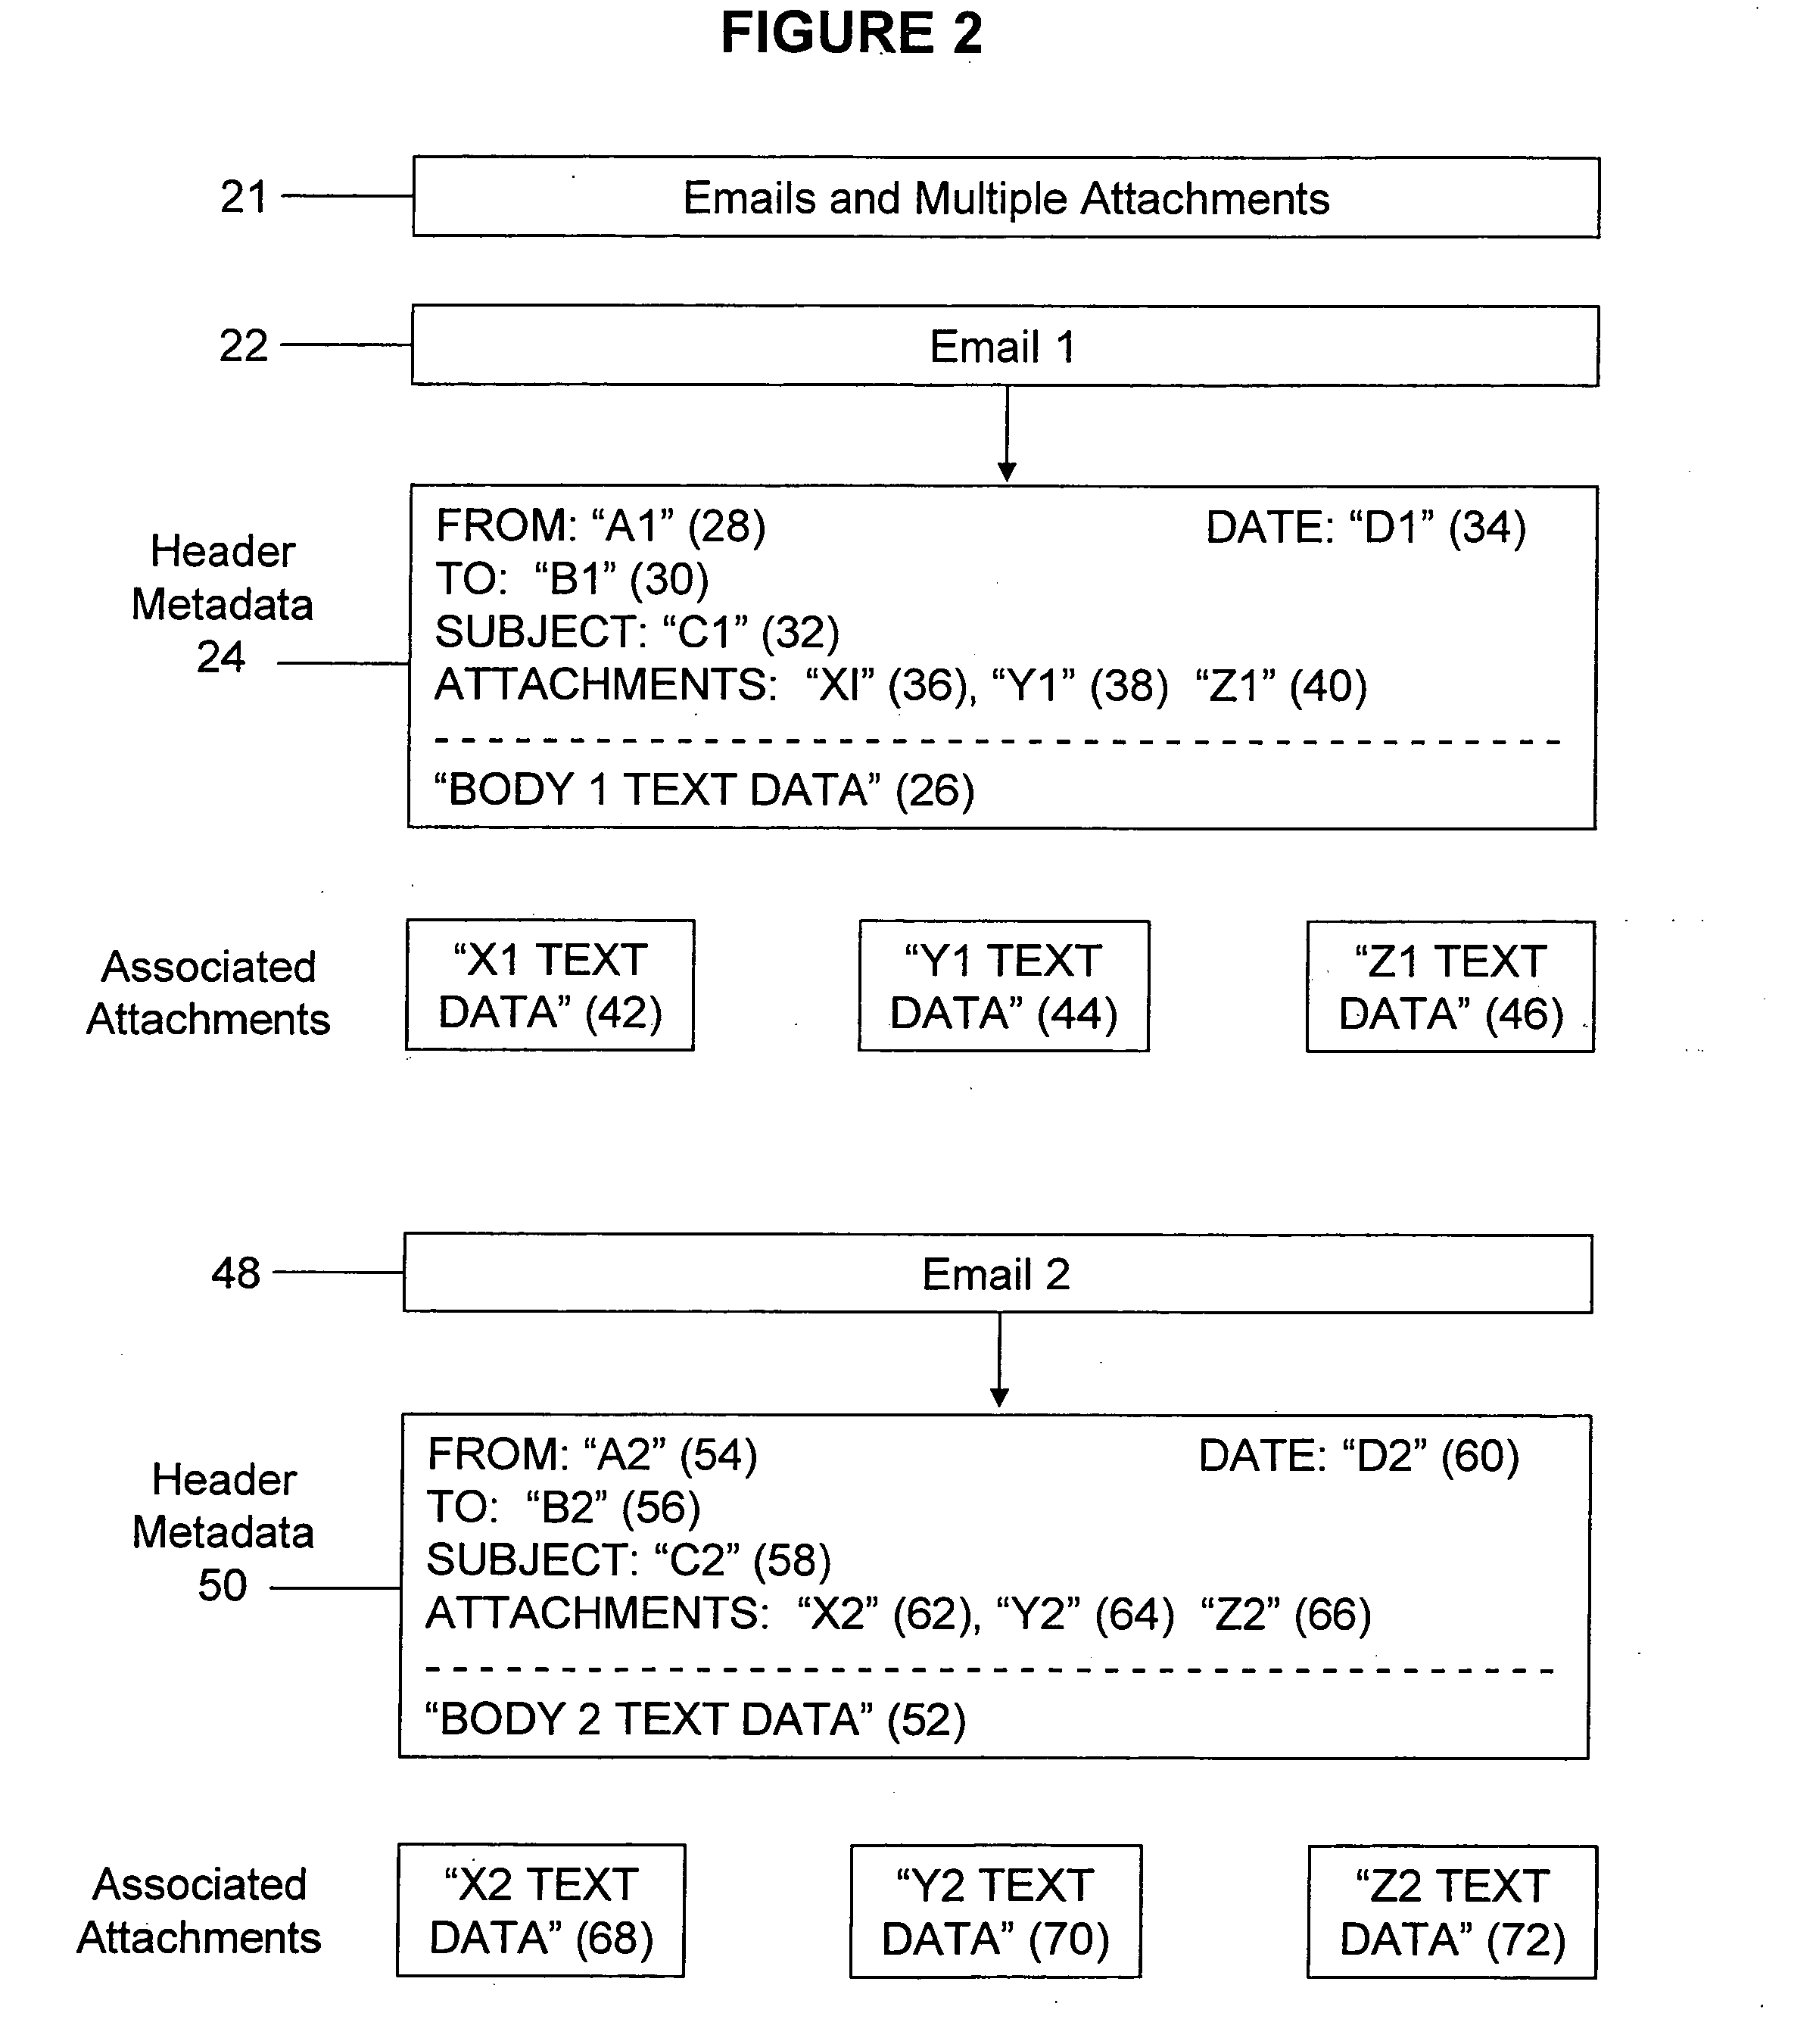 Computer program for storing electronic files and associated attachments in a single searchable database